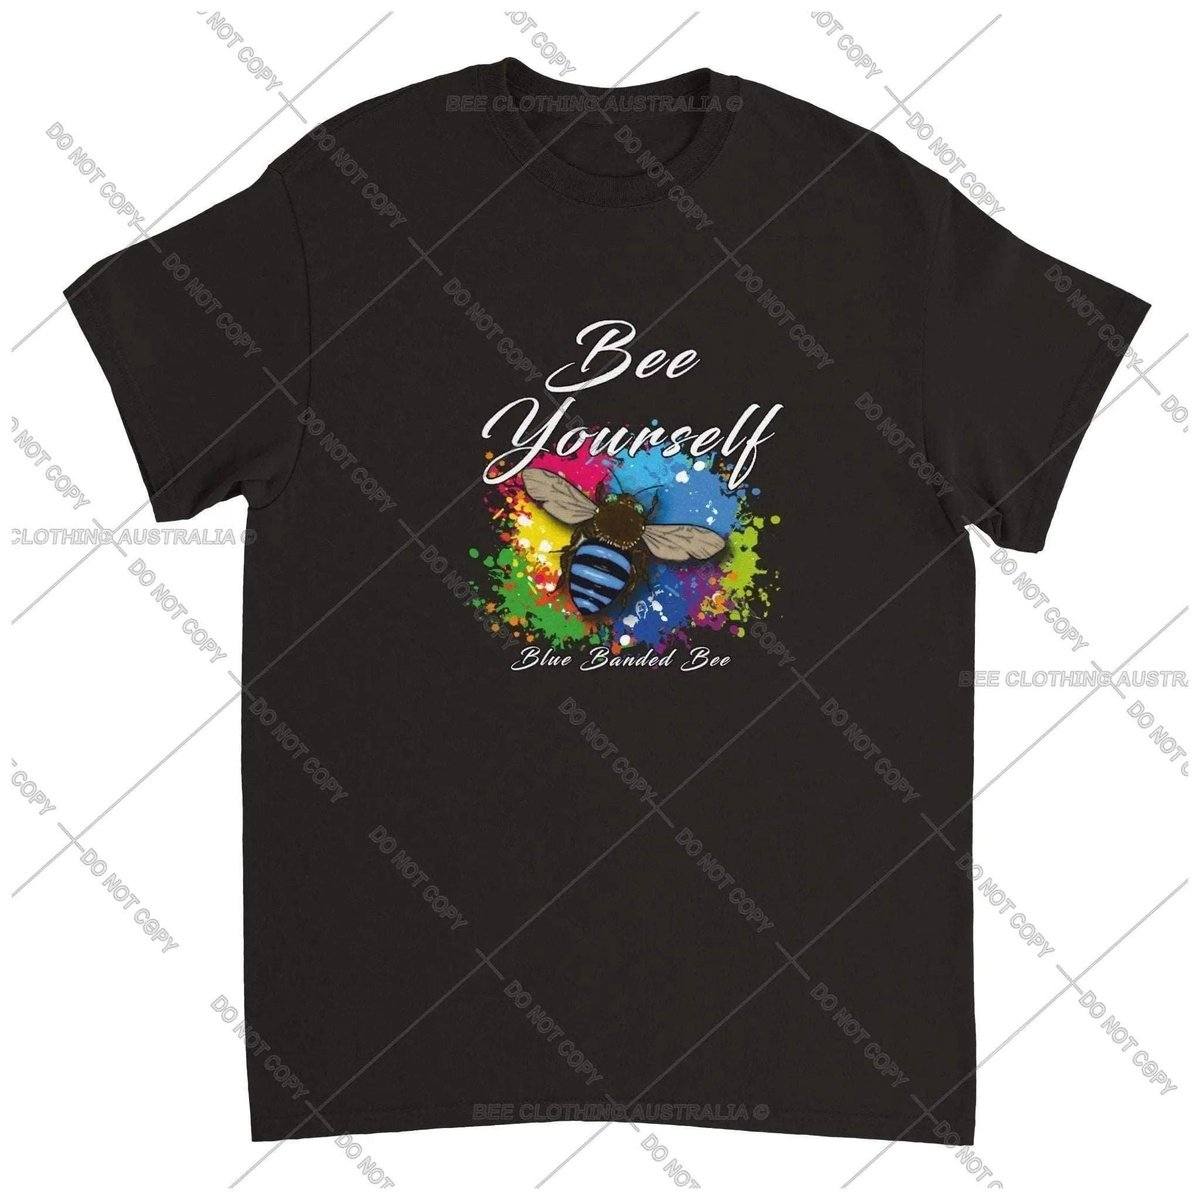 Bee Yourself - Blue Banded Bee - Native Bee T-Shirt Unisex Australia Online Color Black / S